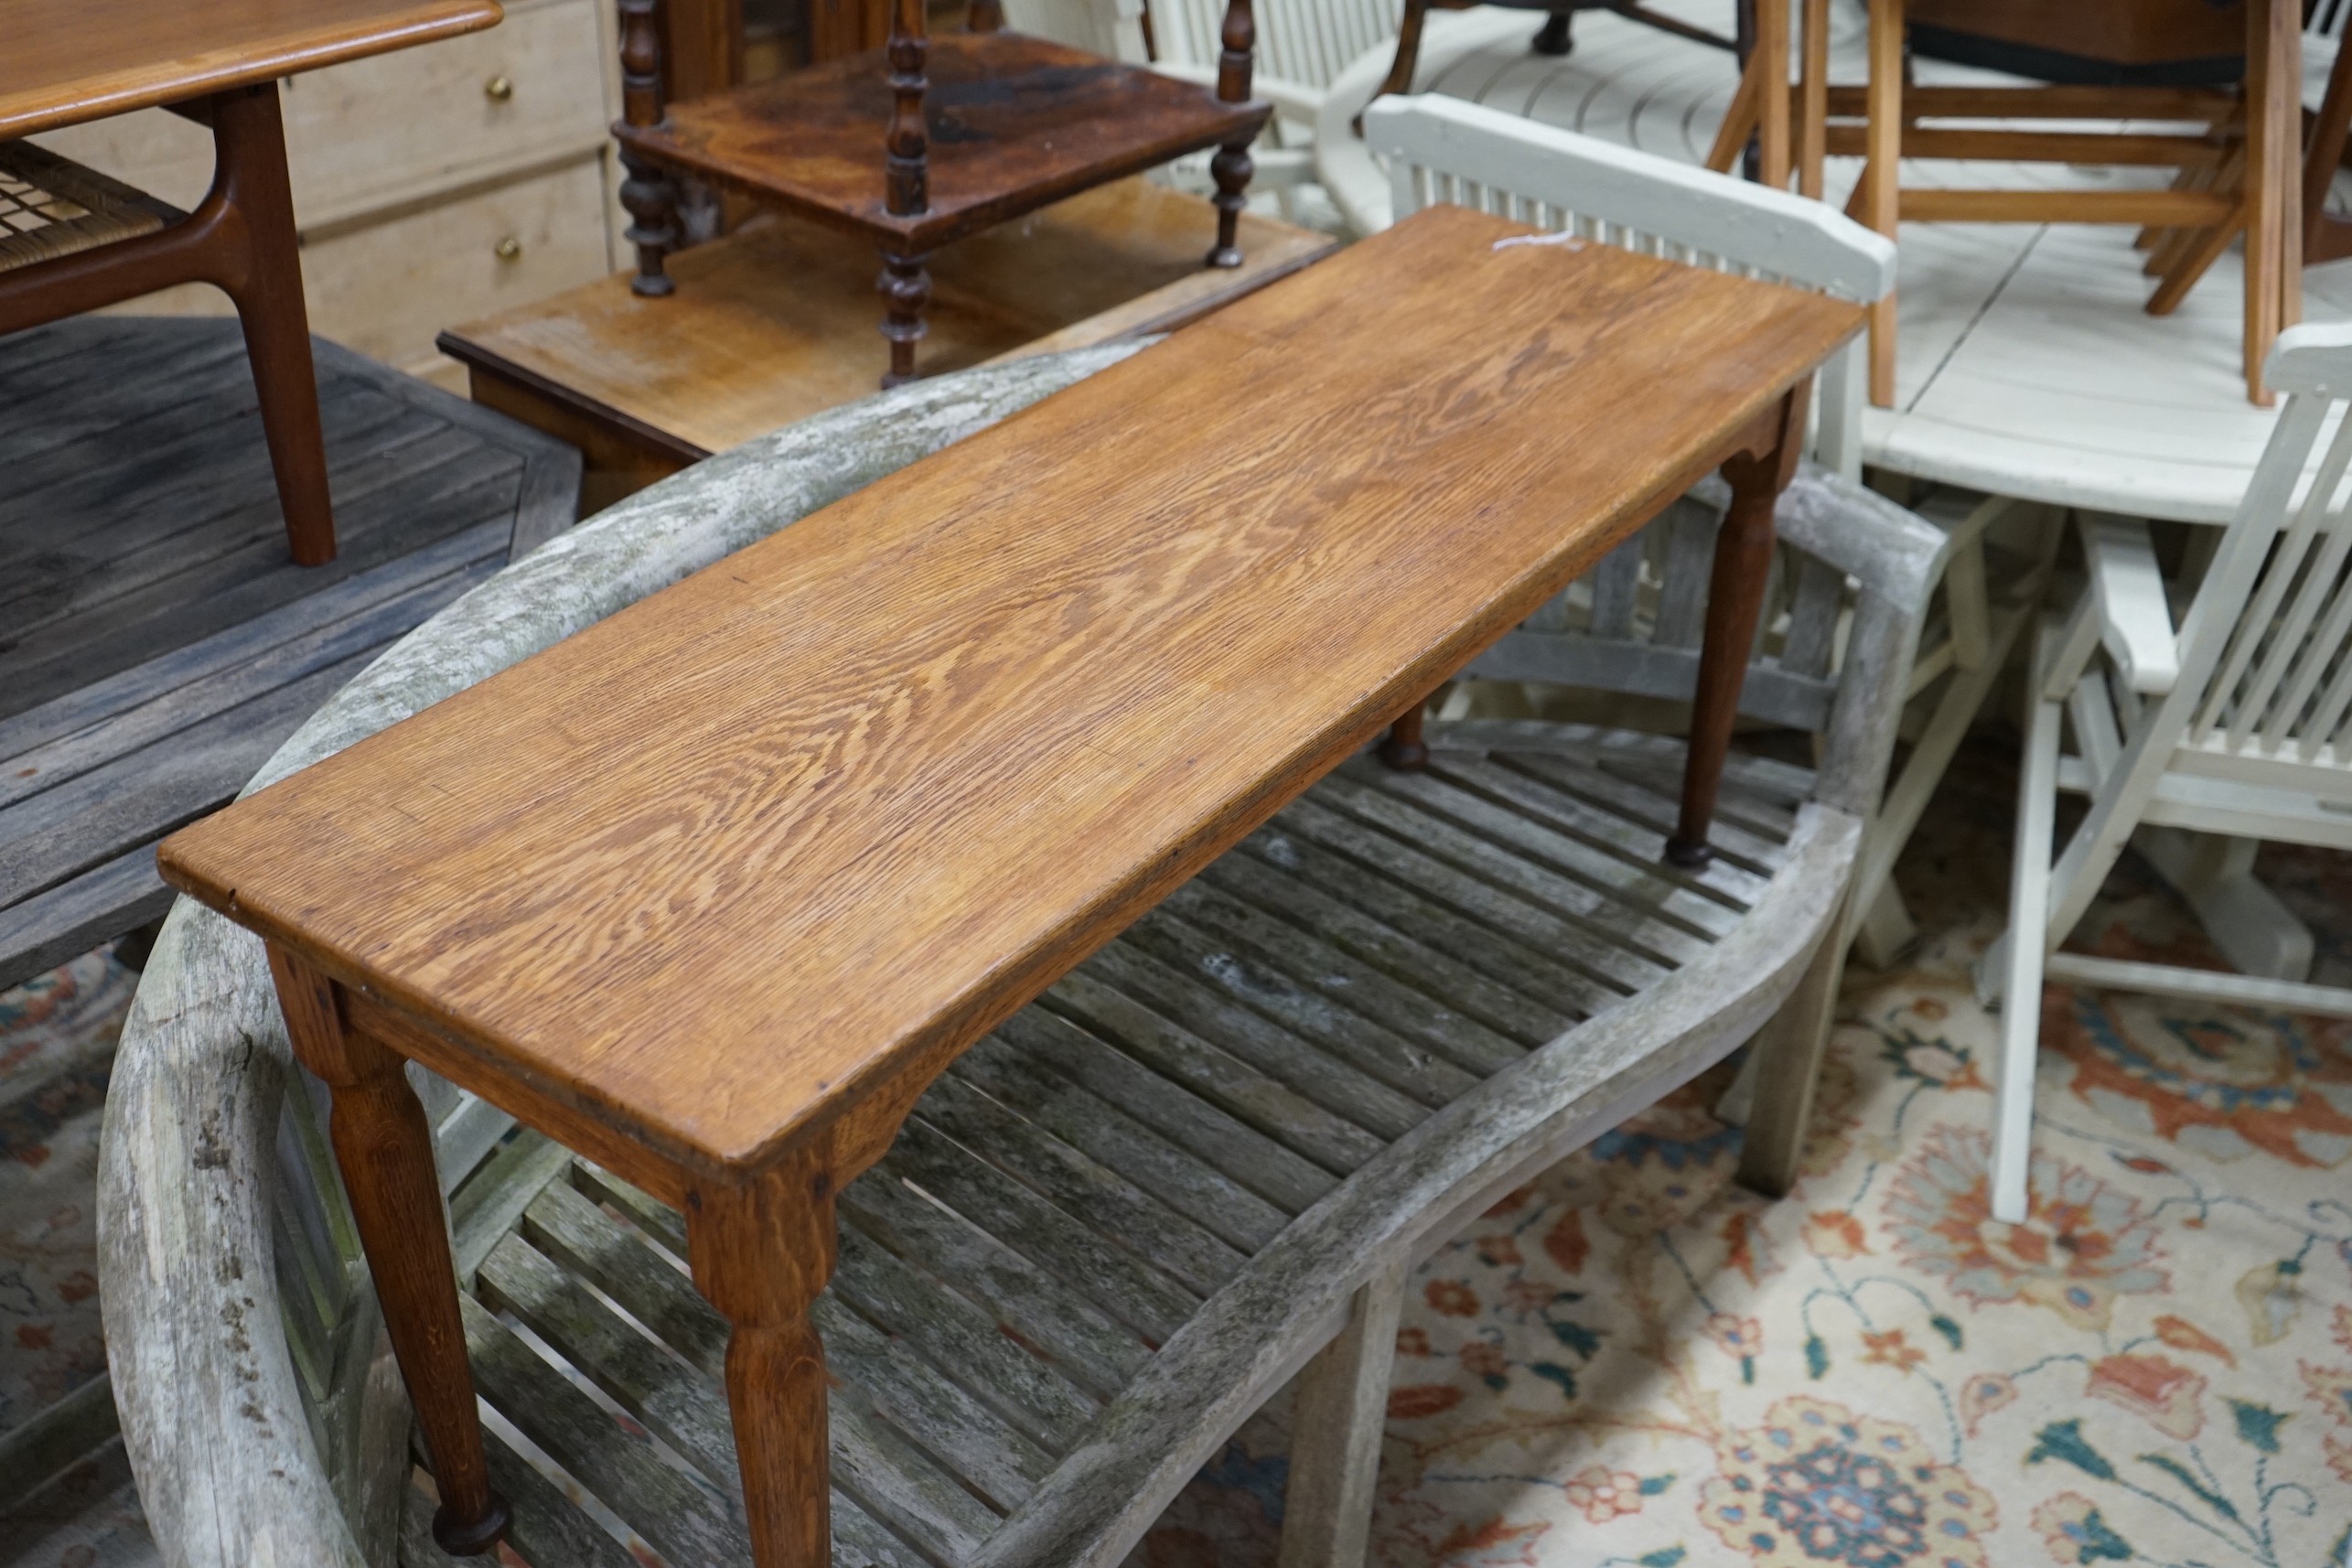 An Arts and Crafts rectangular oak low table / bench, length 122cm, depth 37cm, height 48cm